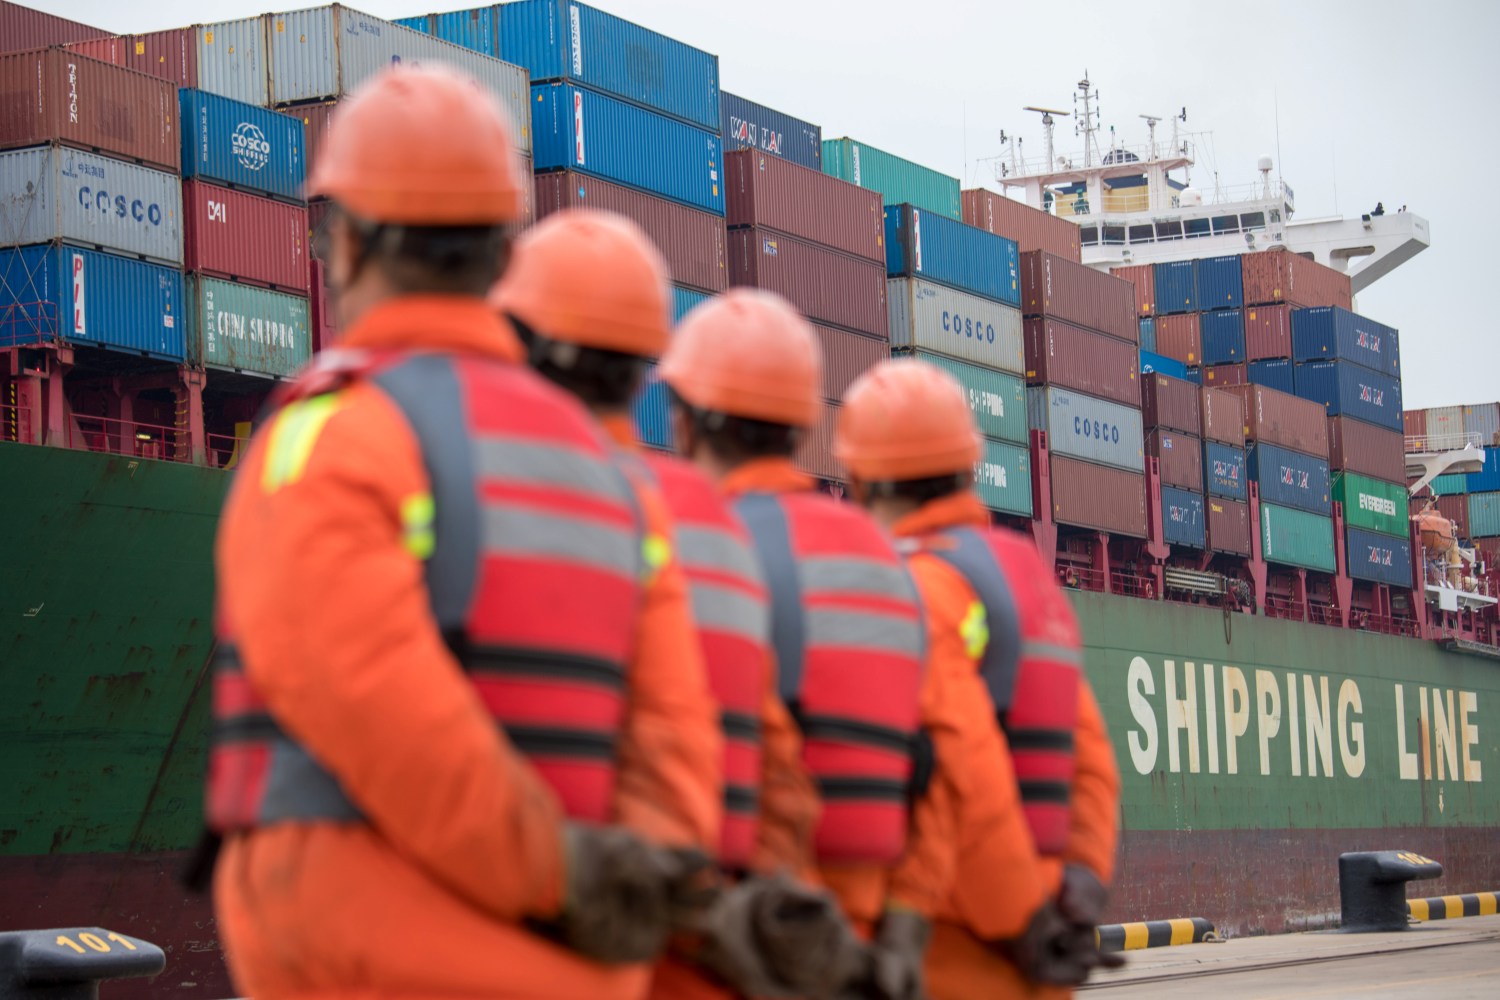 Workers look on as a cargo ship approaches a terminal at the port of Qingdao in Shandong province, China November 8, 2018. REUTERS/Stringer ATTENTION EDITORS - THIS IMAGE WAS PROVIDED BY A THIRD PARTY. CHINA OUT. - RC1BD4412950